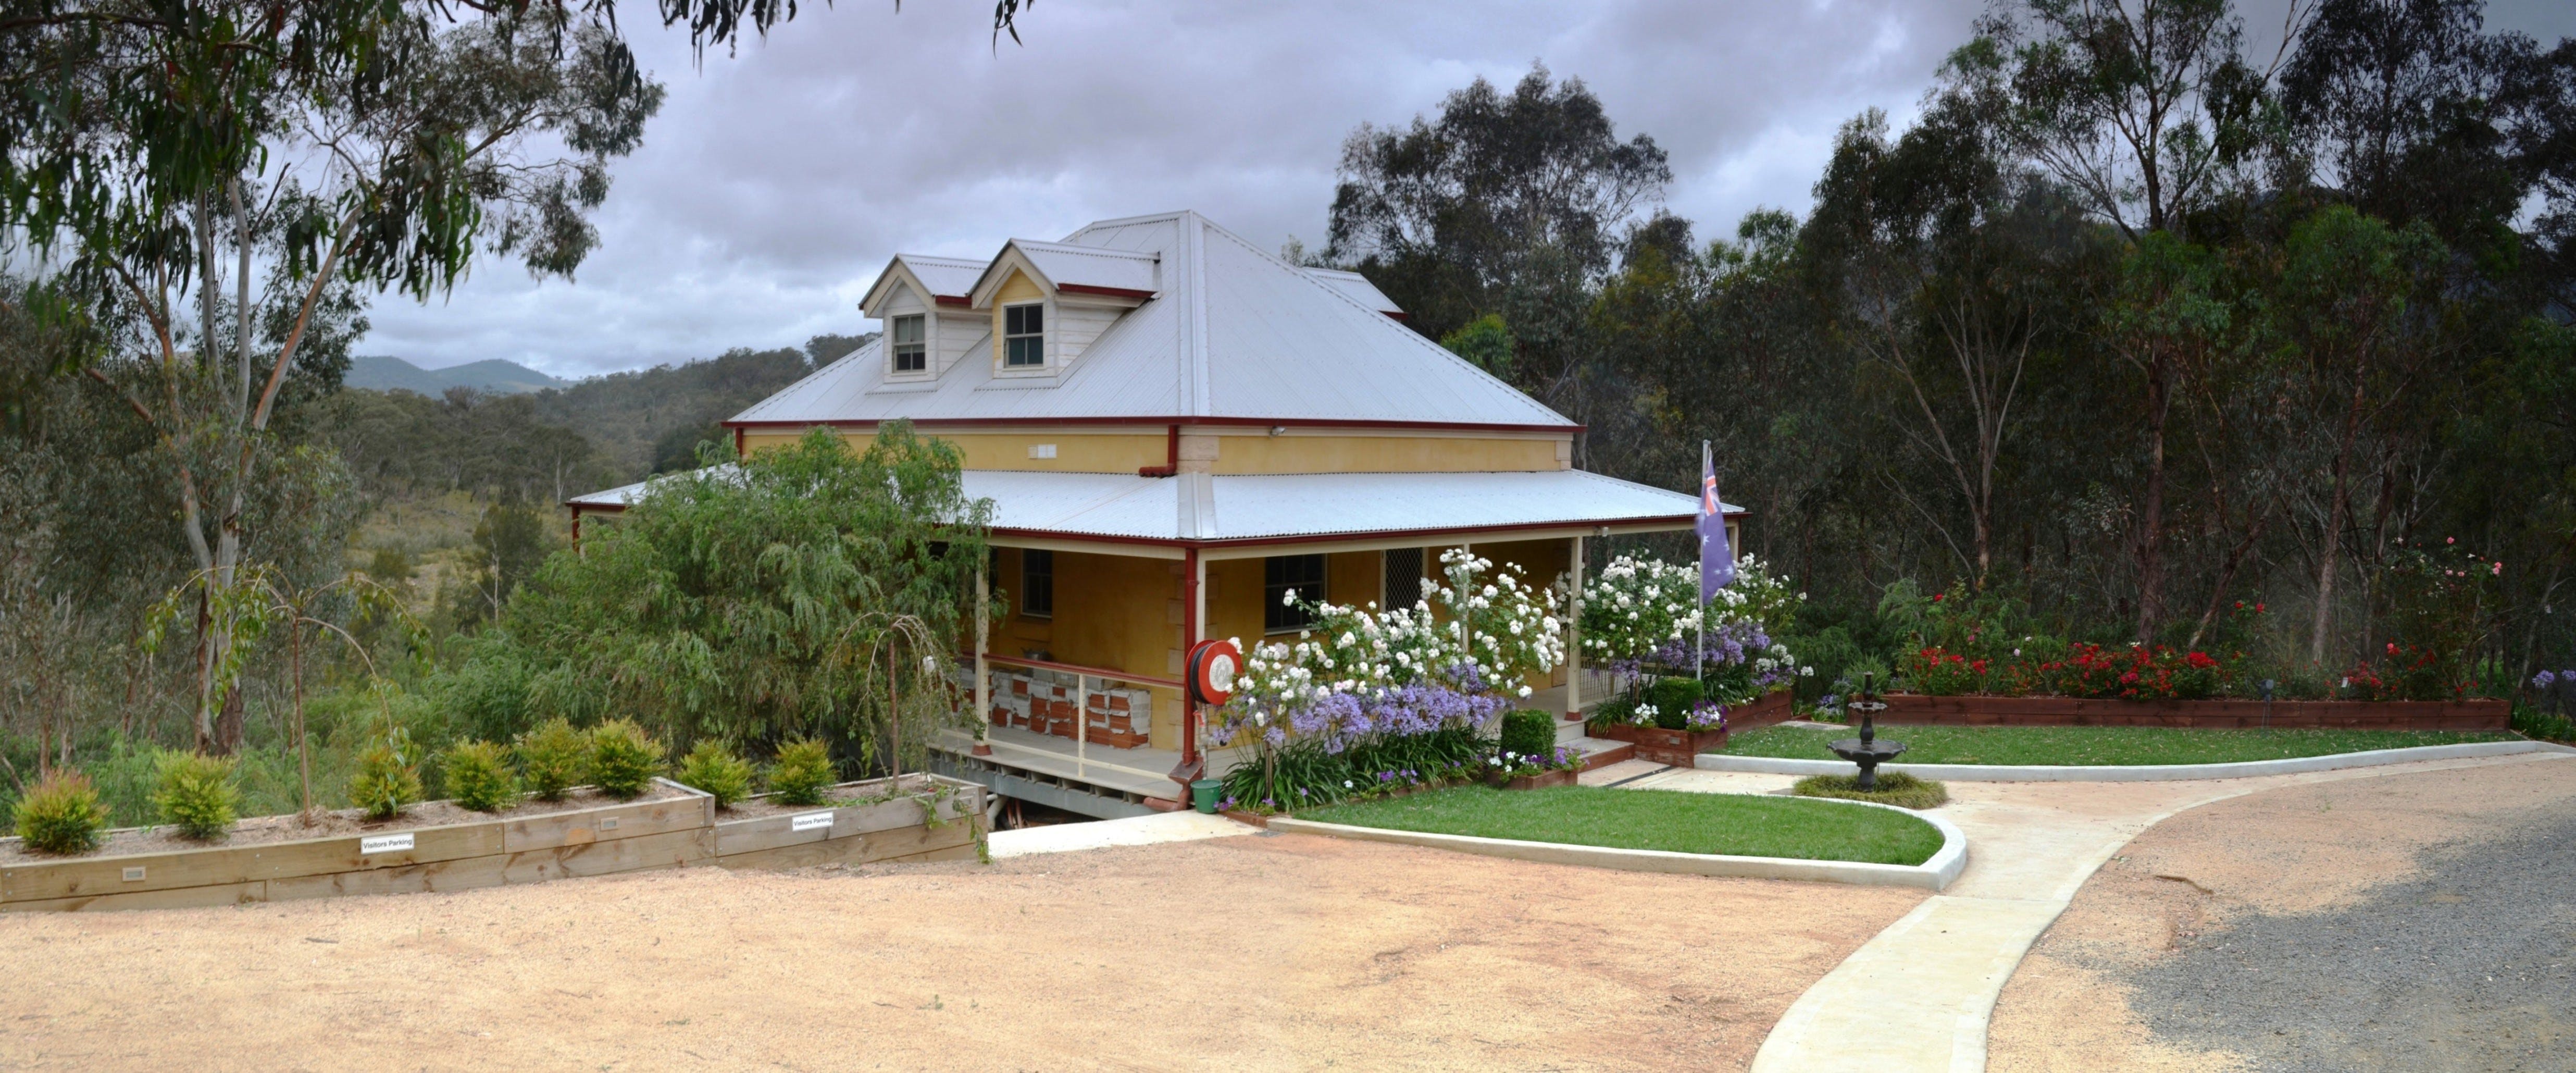 Tanwarra Lodge Bed and Breakfast - Carnarvon Accommodation